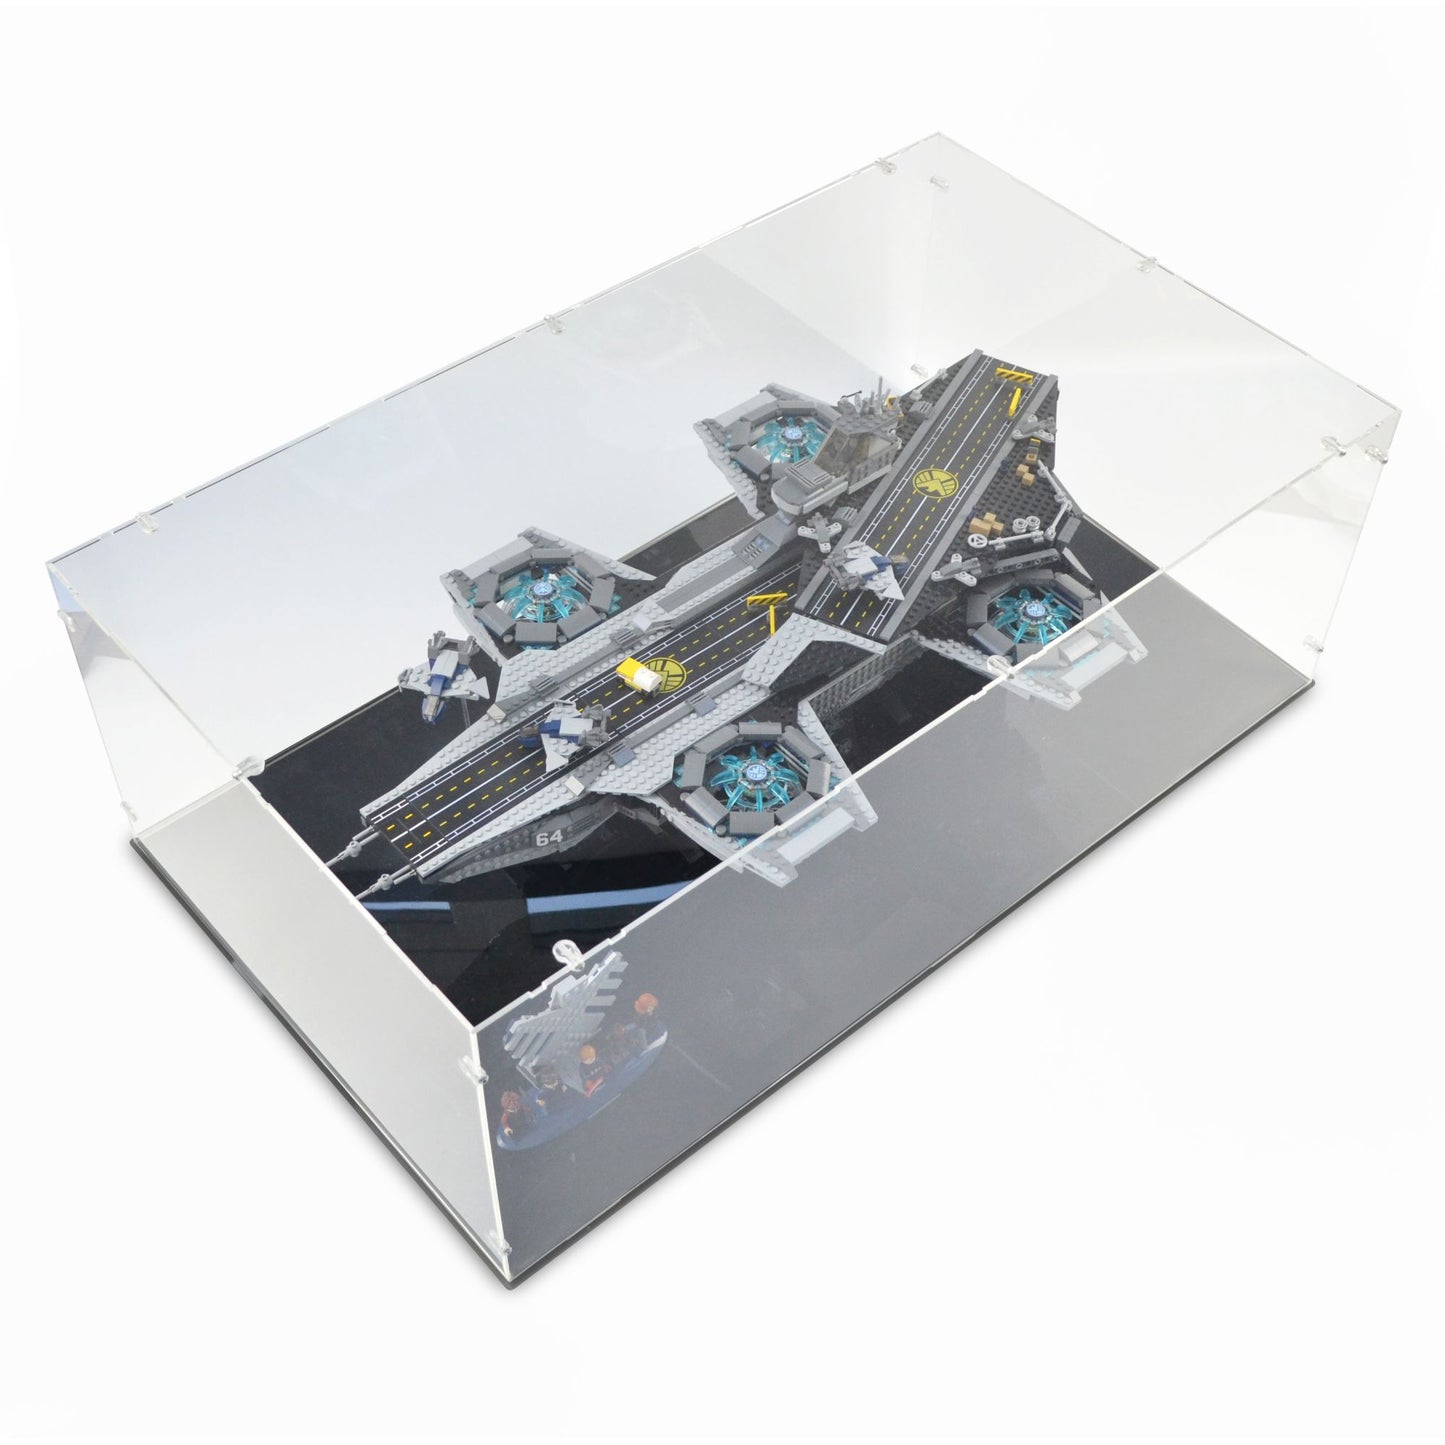 76042 The SHIELD Helicarrier Display Case